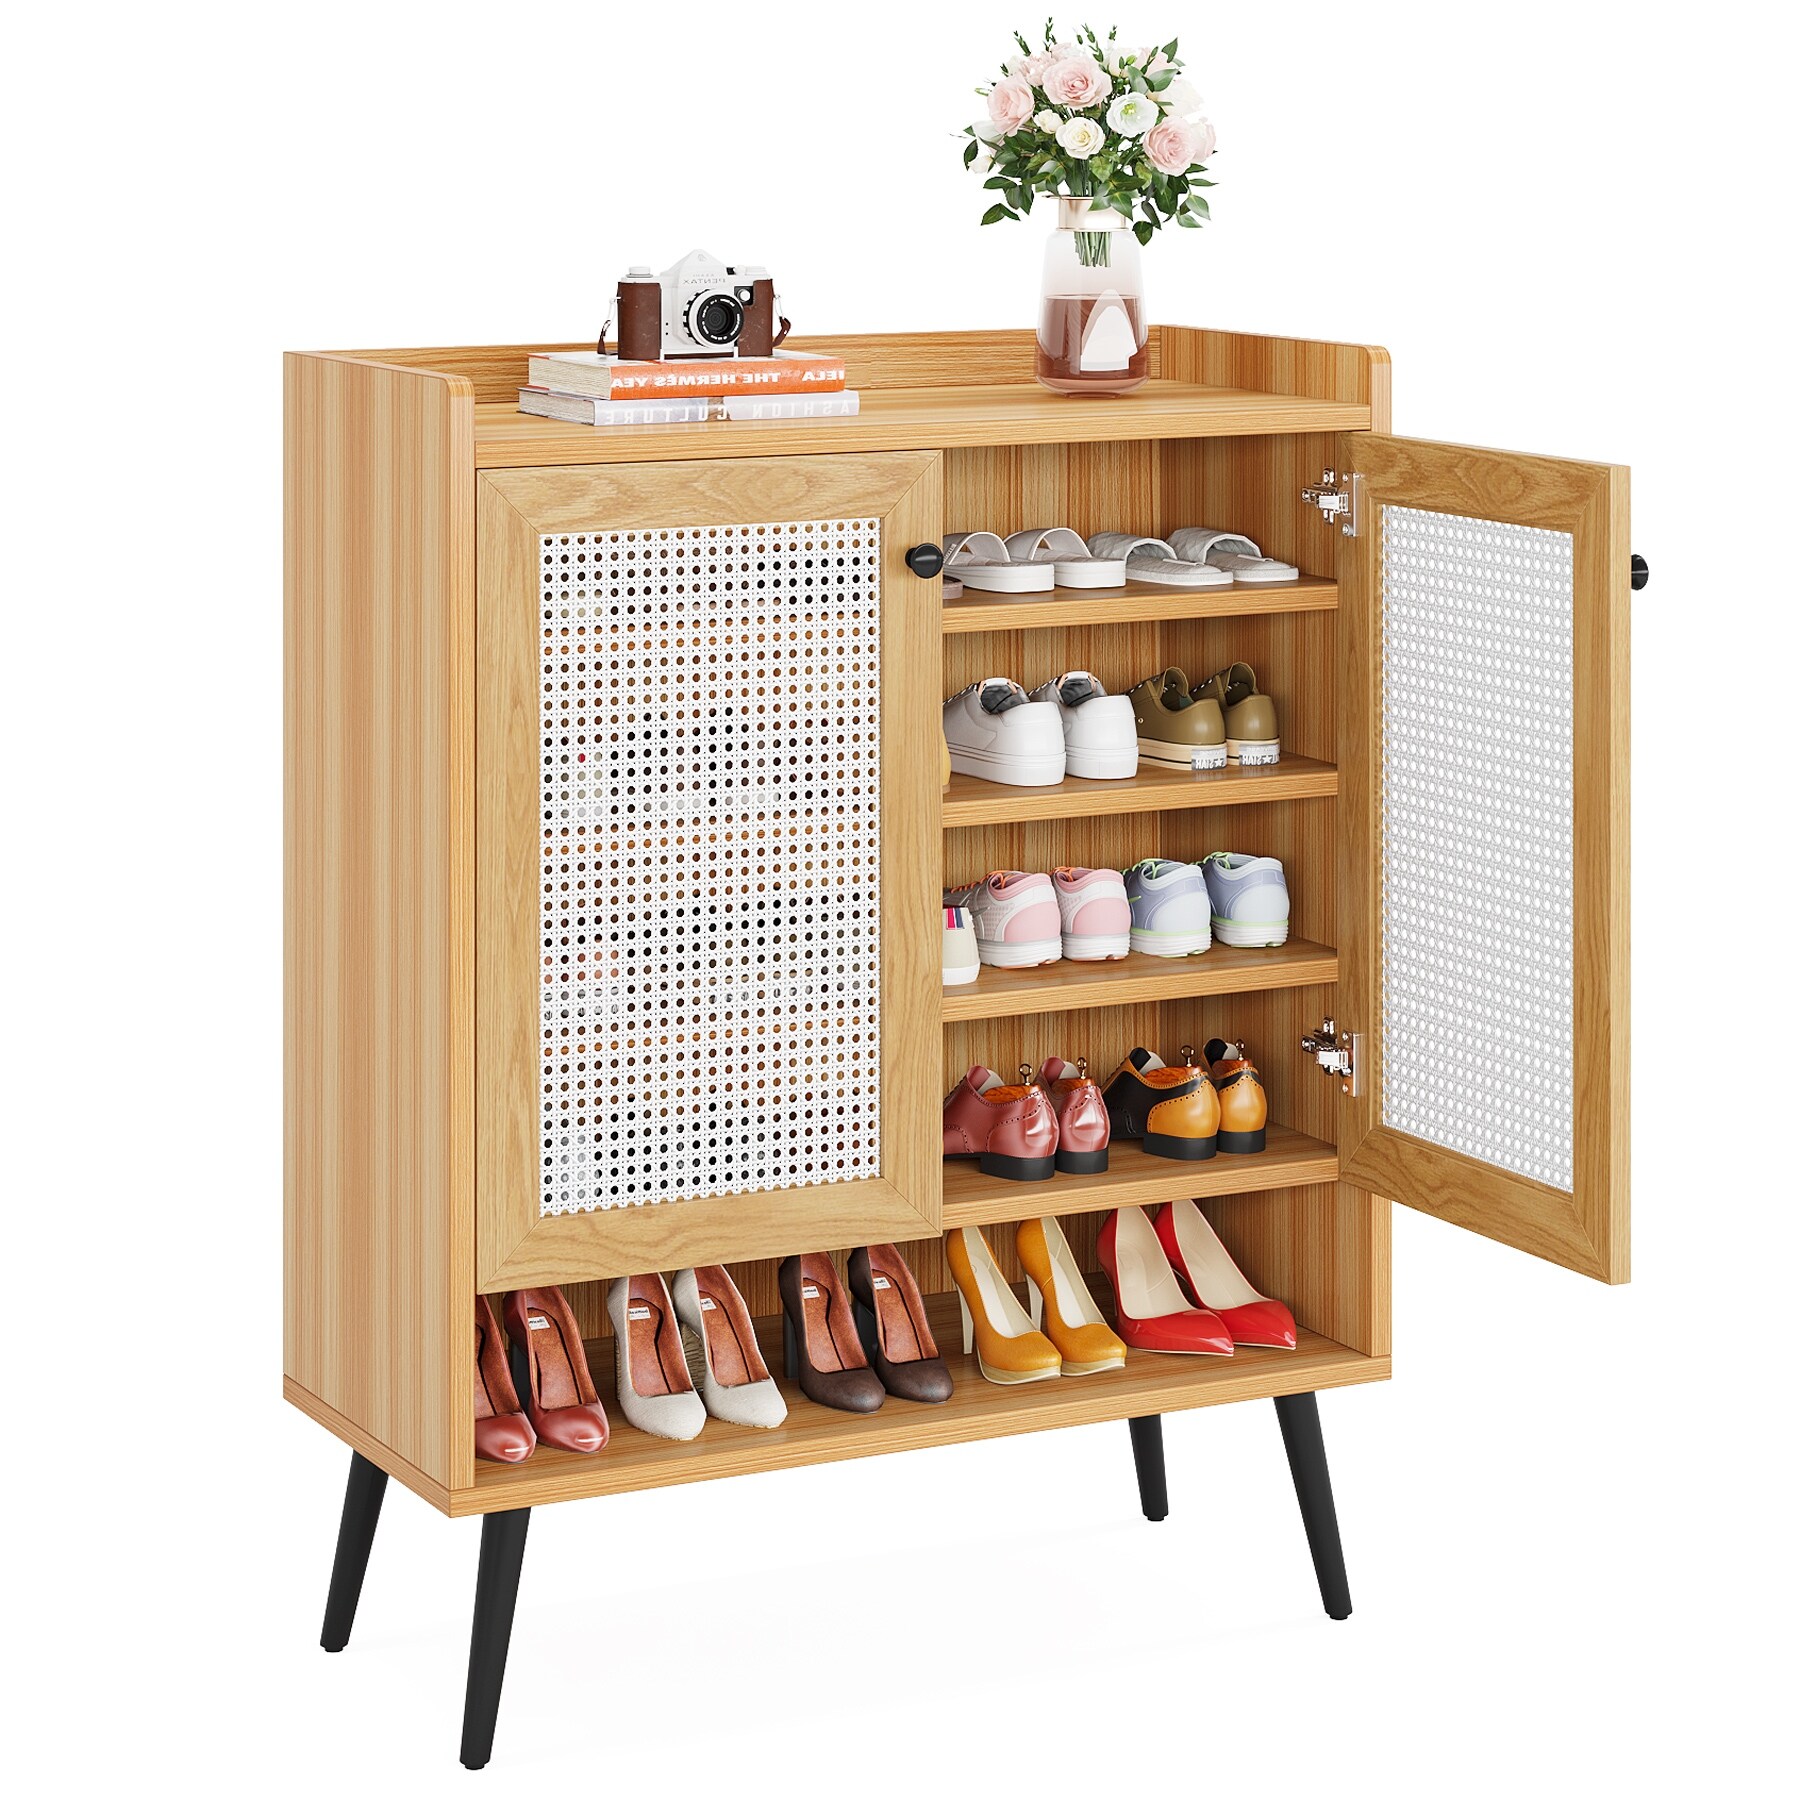 https://ak1.ostkcdn.com/images/products/is/images/direct/d75722e9a0ec52eca5f9502c6f759142dba88005/Shoe-Cabinet-with-Doors%2C-Rattan-Shoe-Storage-Cabinet%2C-6-Tier-Shoes-Organizer-Cabinets-for-Entryway.jpg